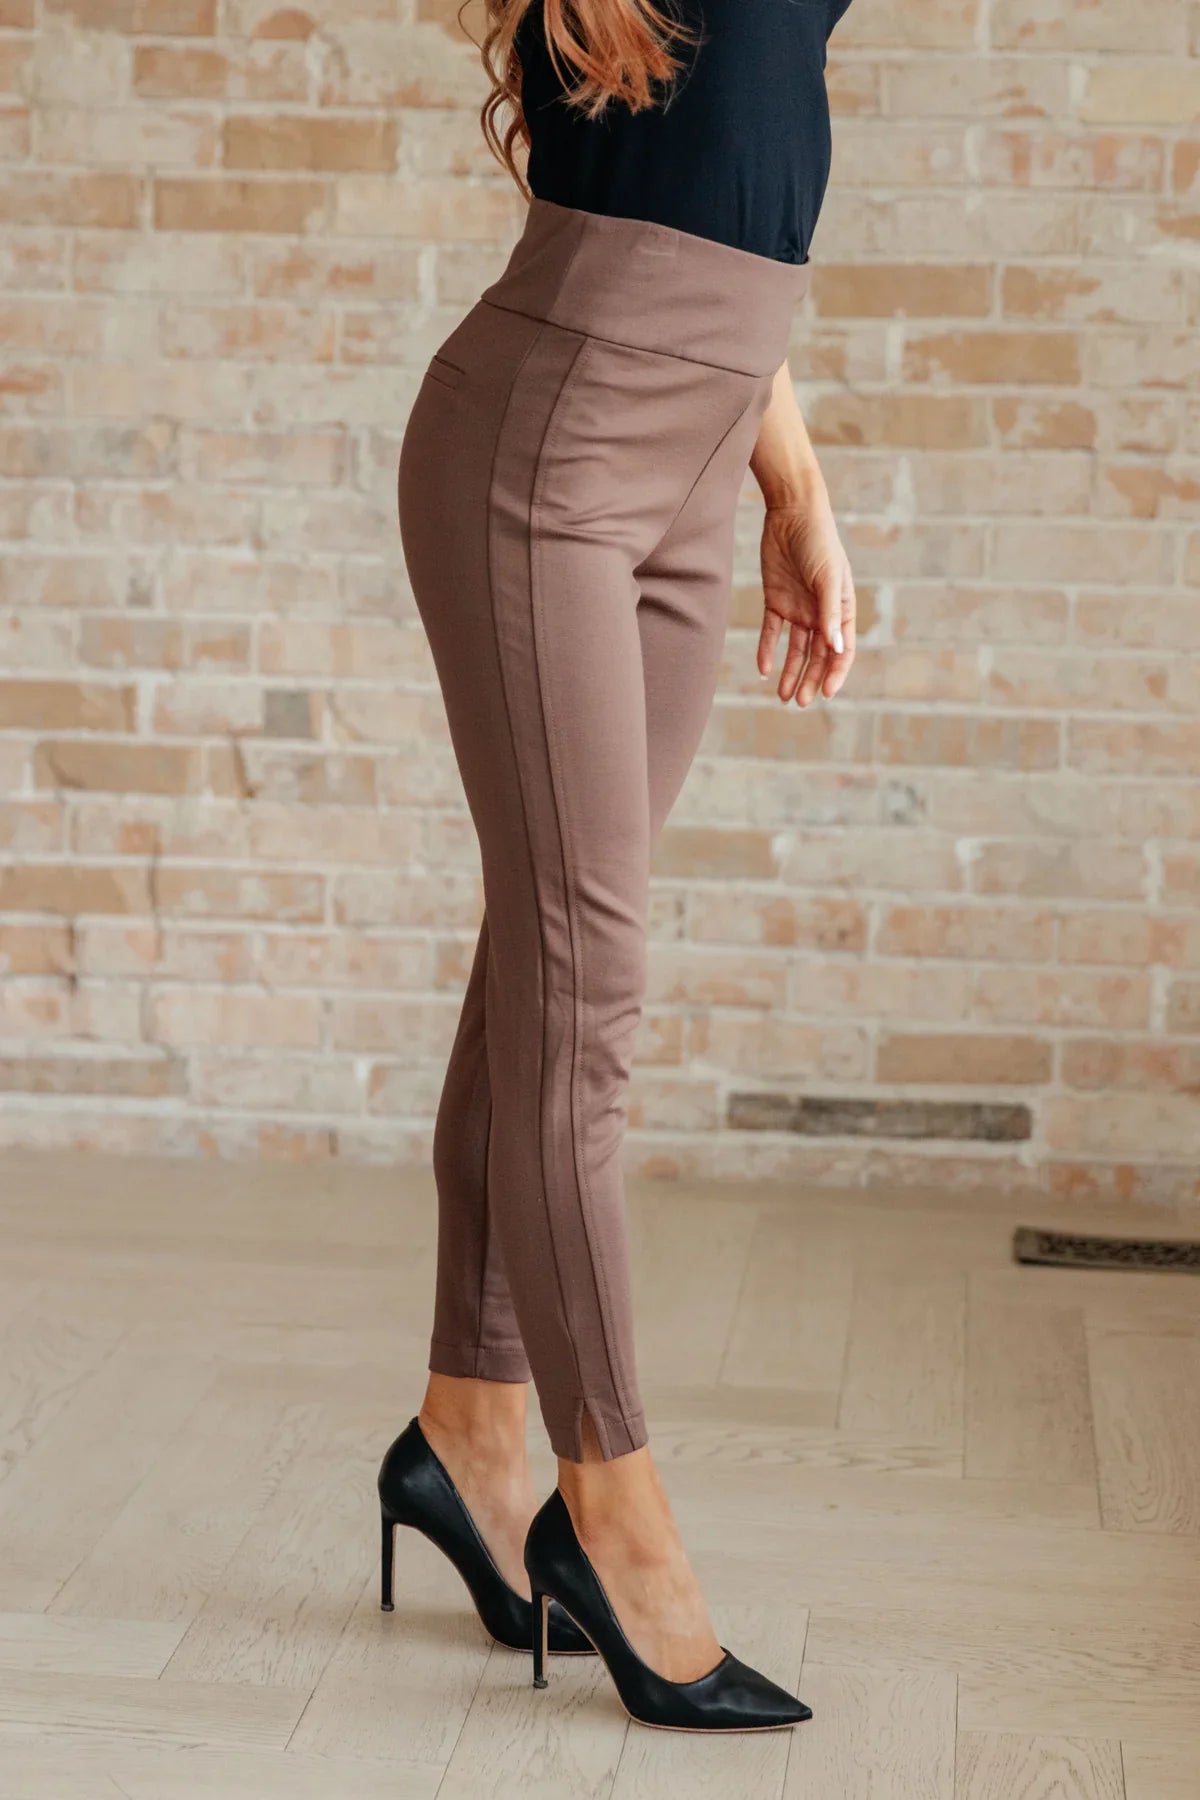 Achieve effortless style and comfort with our Magic Skinny Pants! These high rise pants feature a slim fit and ponte knit for a flattering silhouette